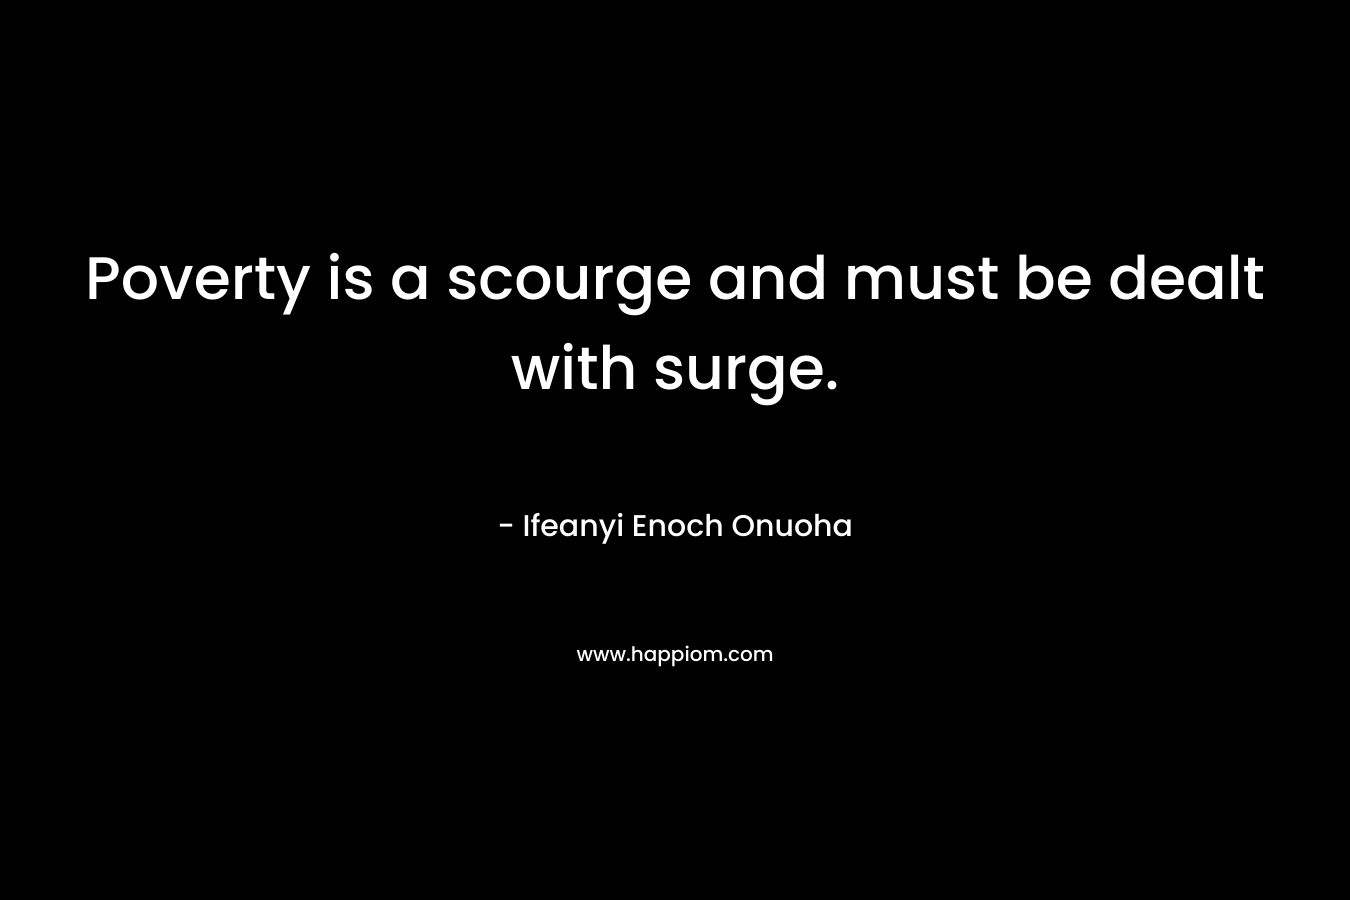 Poverty is a scourge and must be dealt with surge. – Ifeanyi Enoch Onuoha